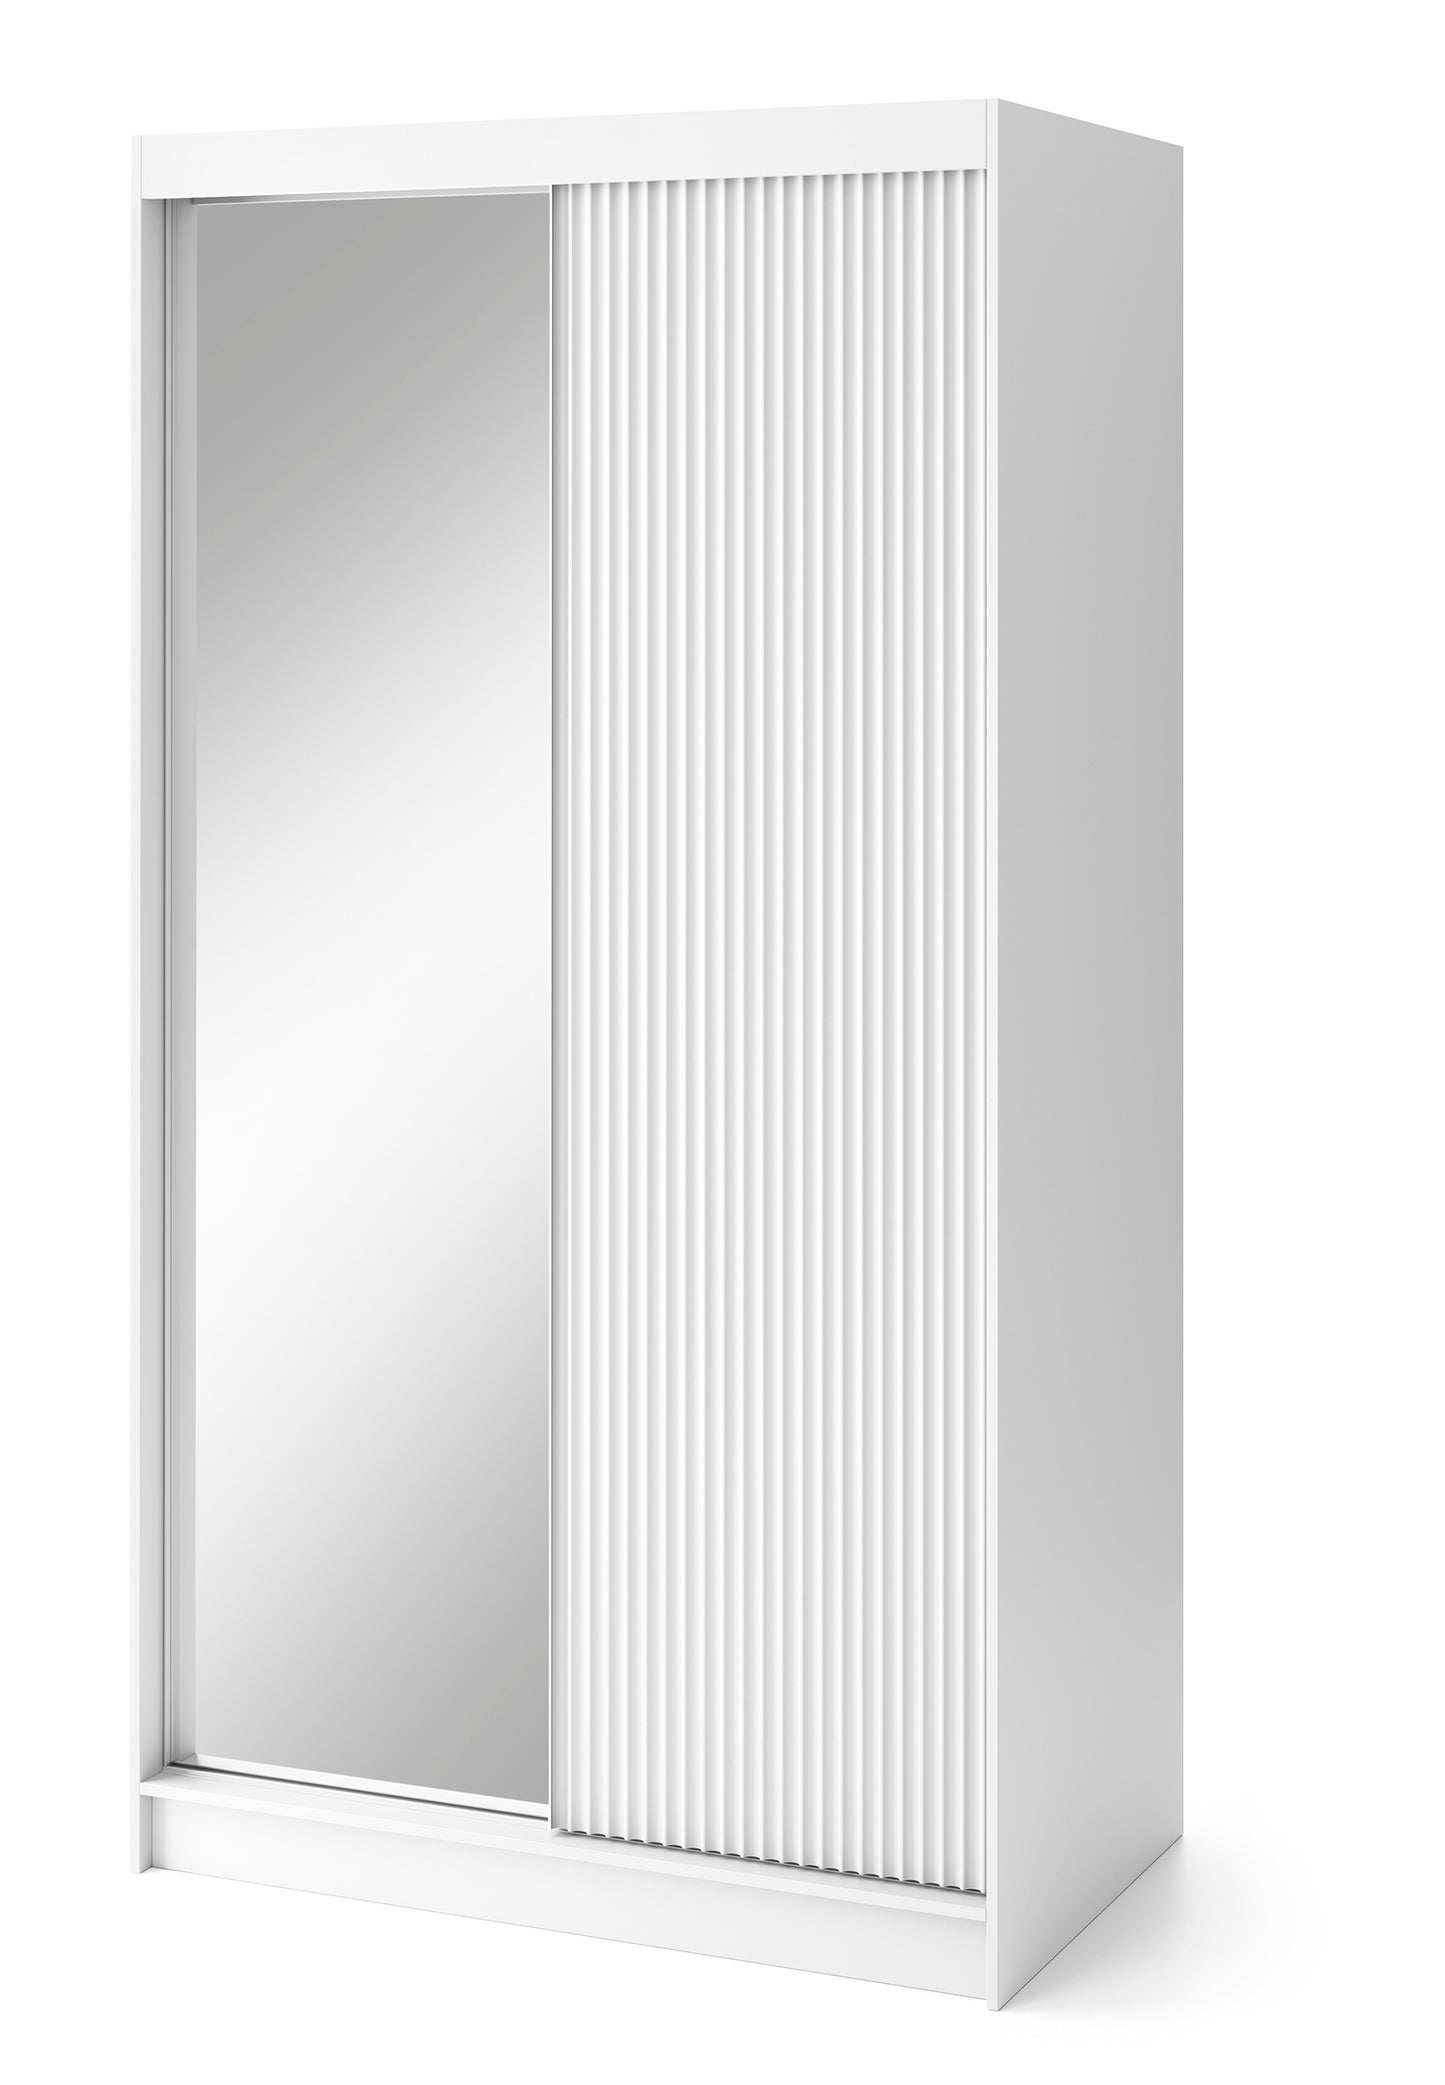 Biancco II with Mirror - Two Sliding Doors Wardrobe White with Hanging Rail, Shelves  >120cm<